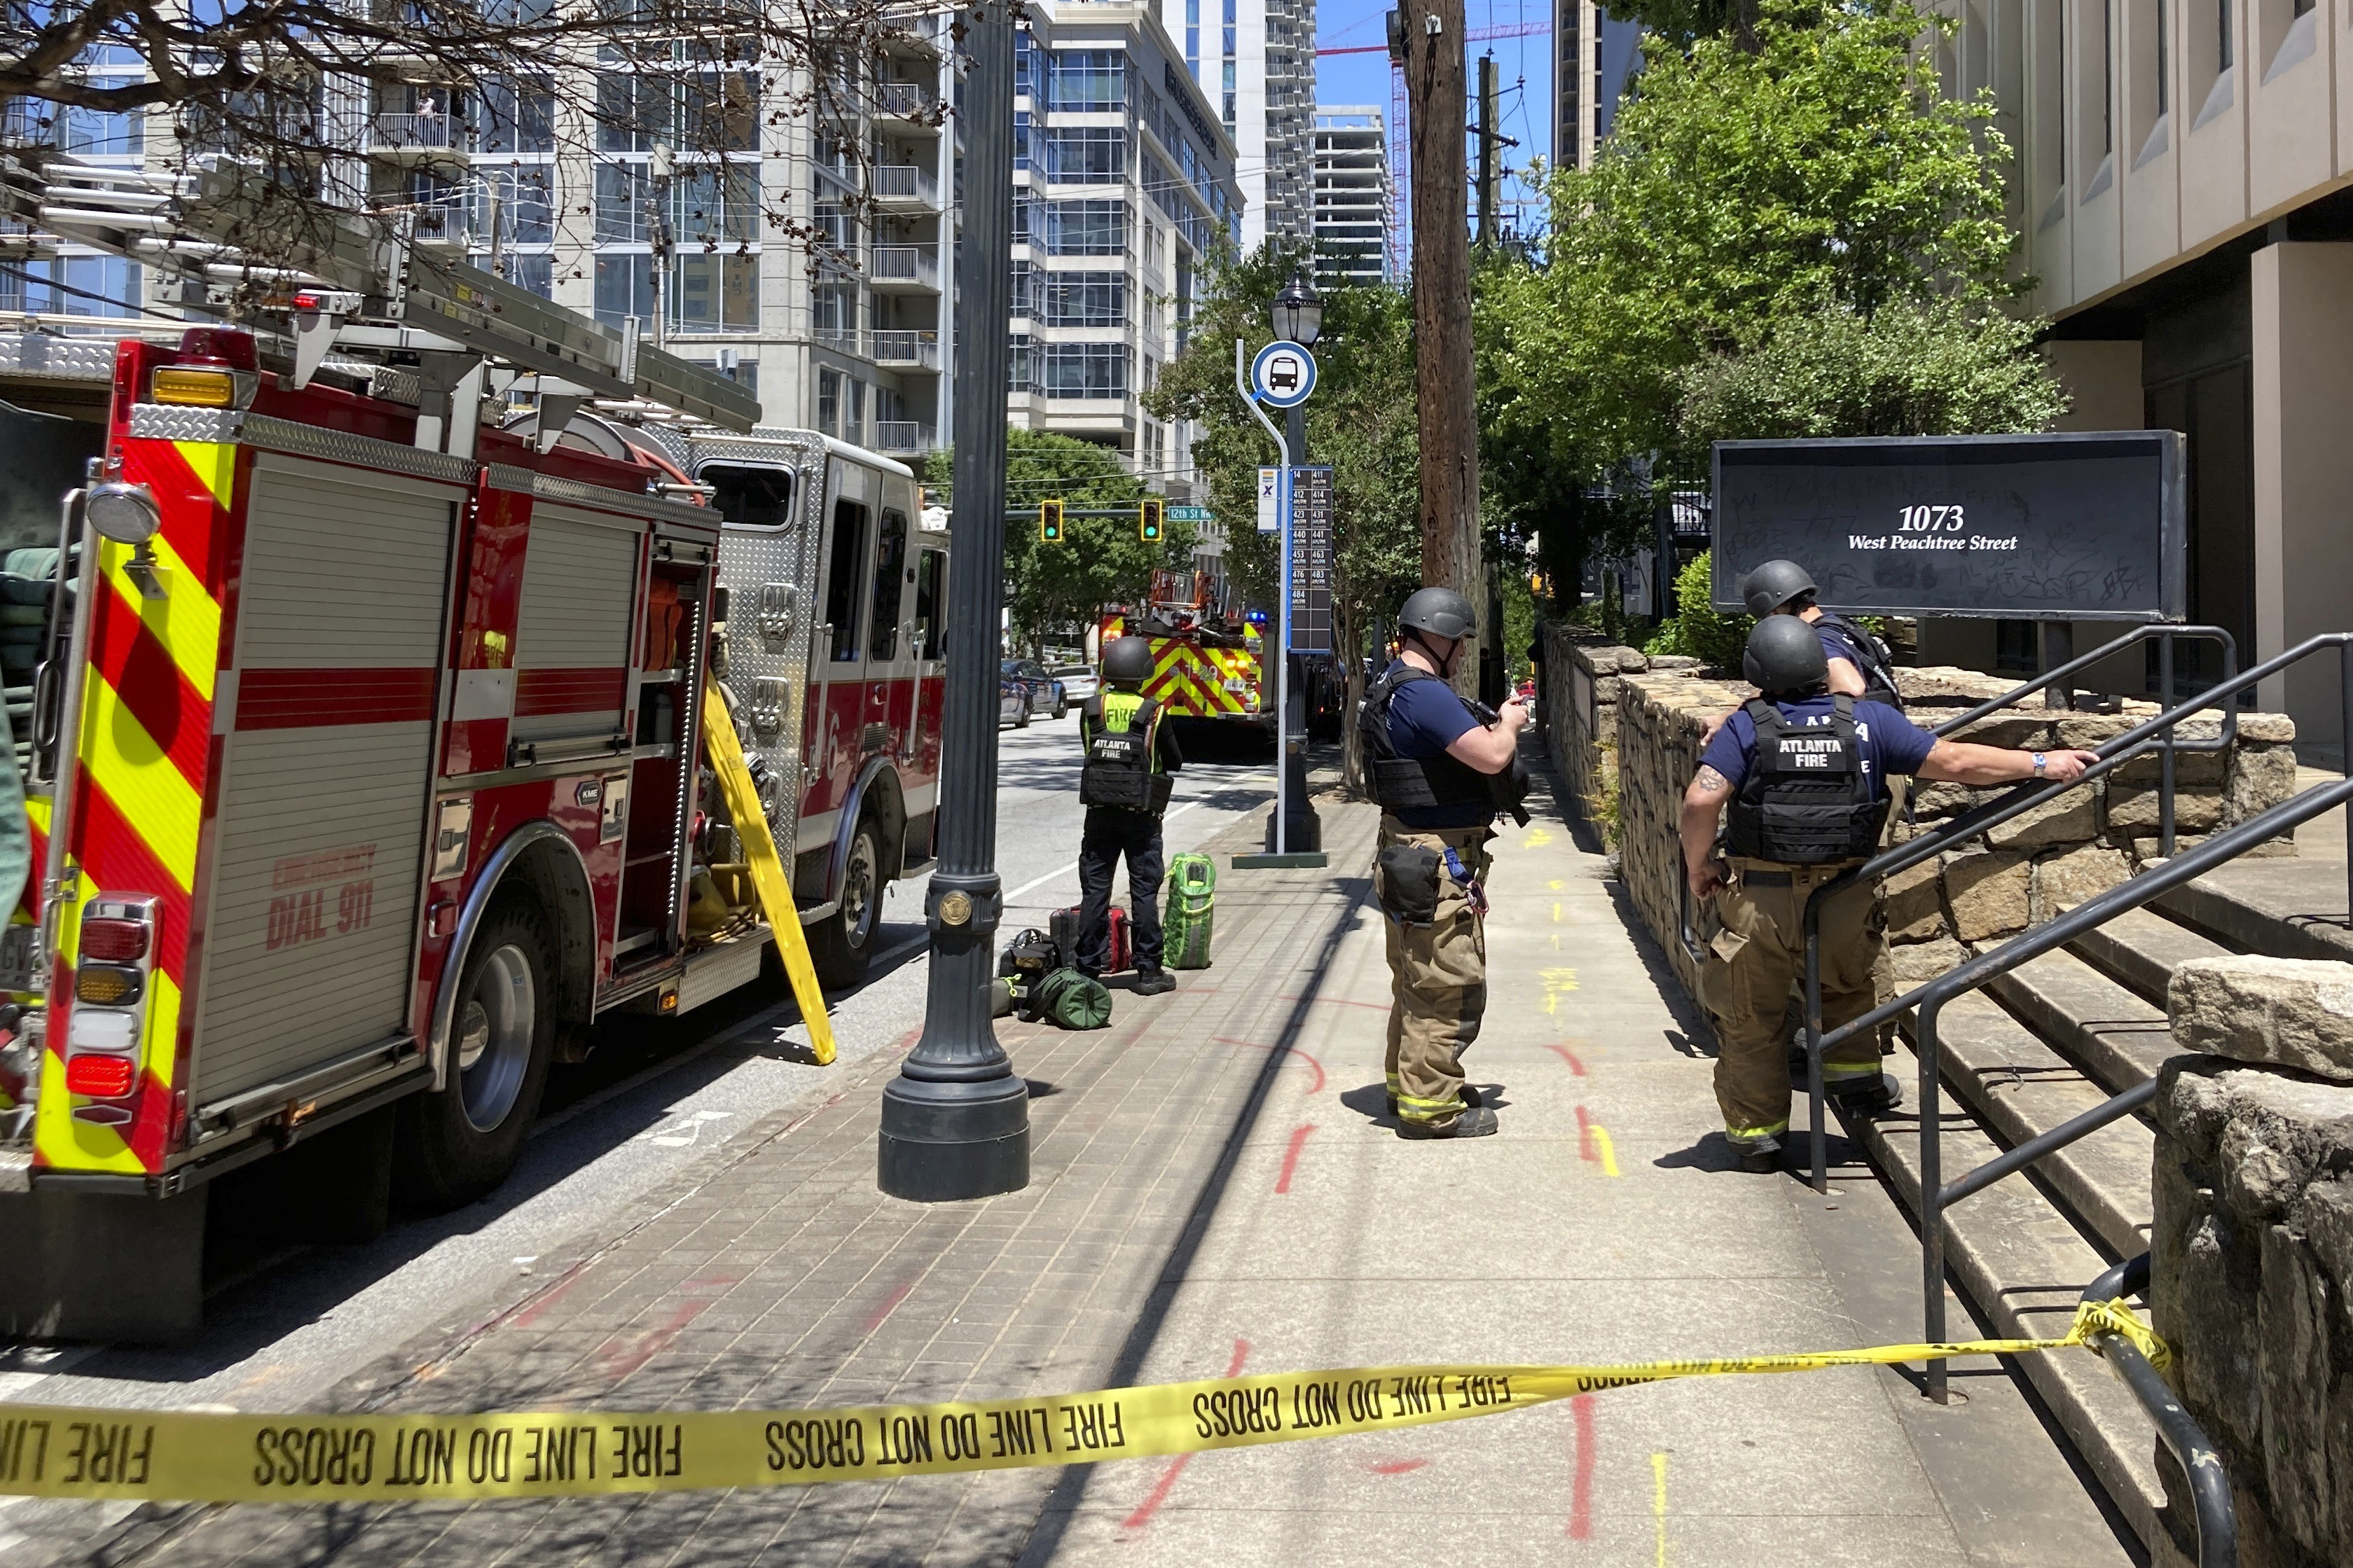 Emergency personnel respond to the scene of active shooting in Atlanta, May 3, 2023. At least one person died, with three others injured, during a shooting in midtown Atlanta.